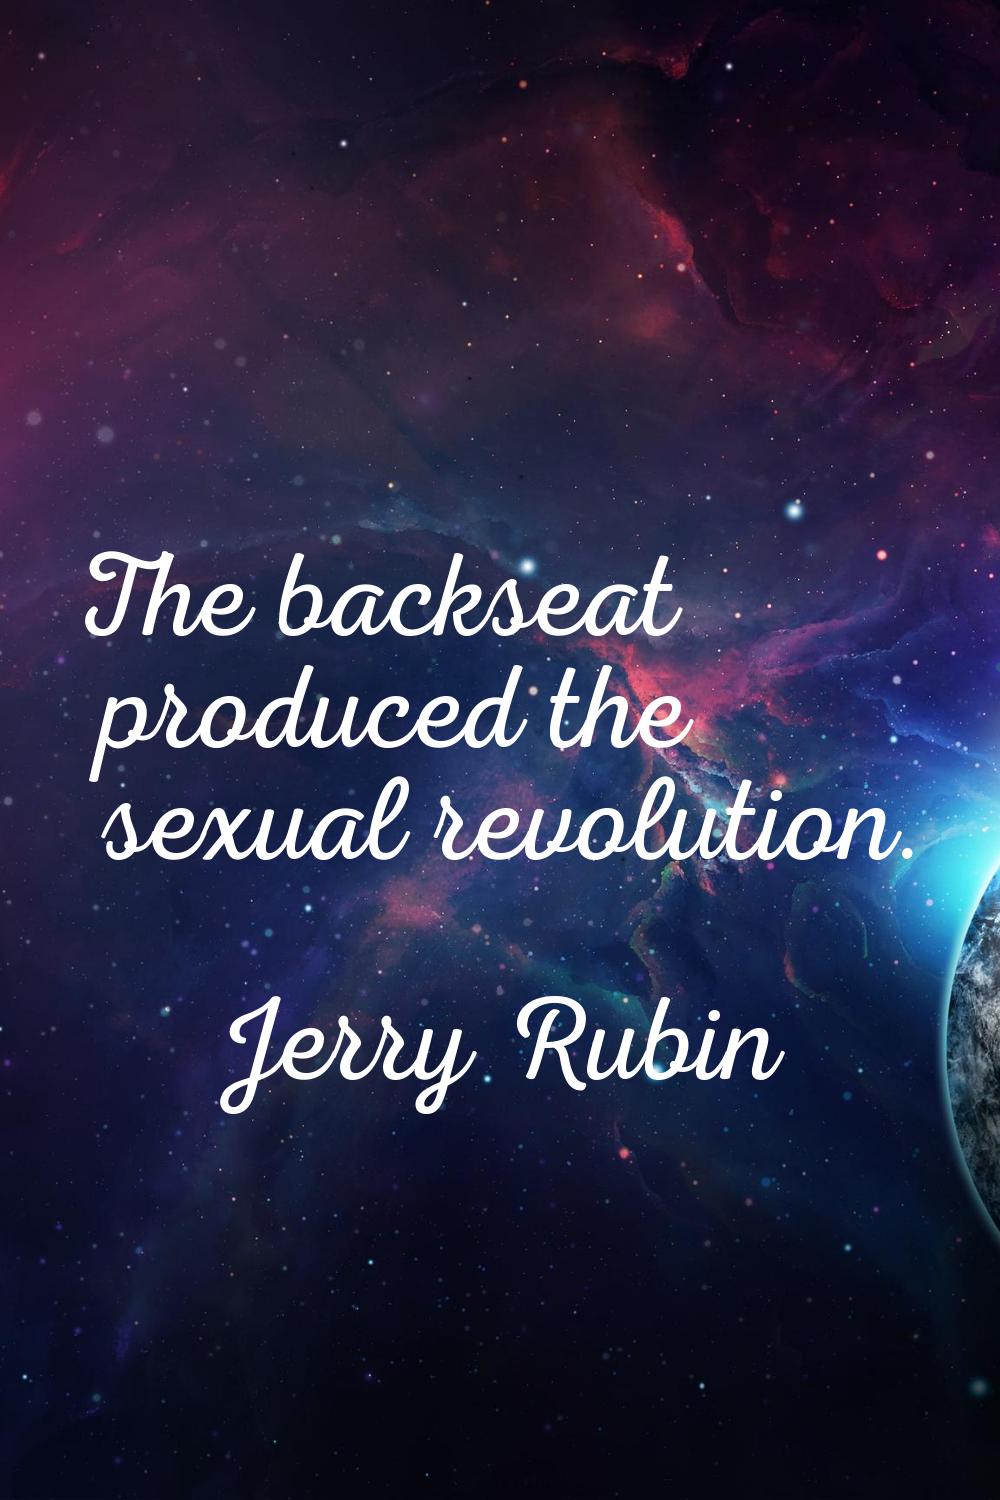 The backseat produced the sexual revolution.